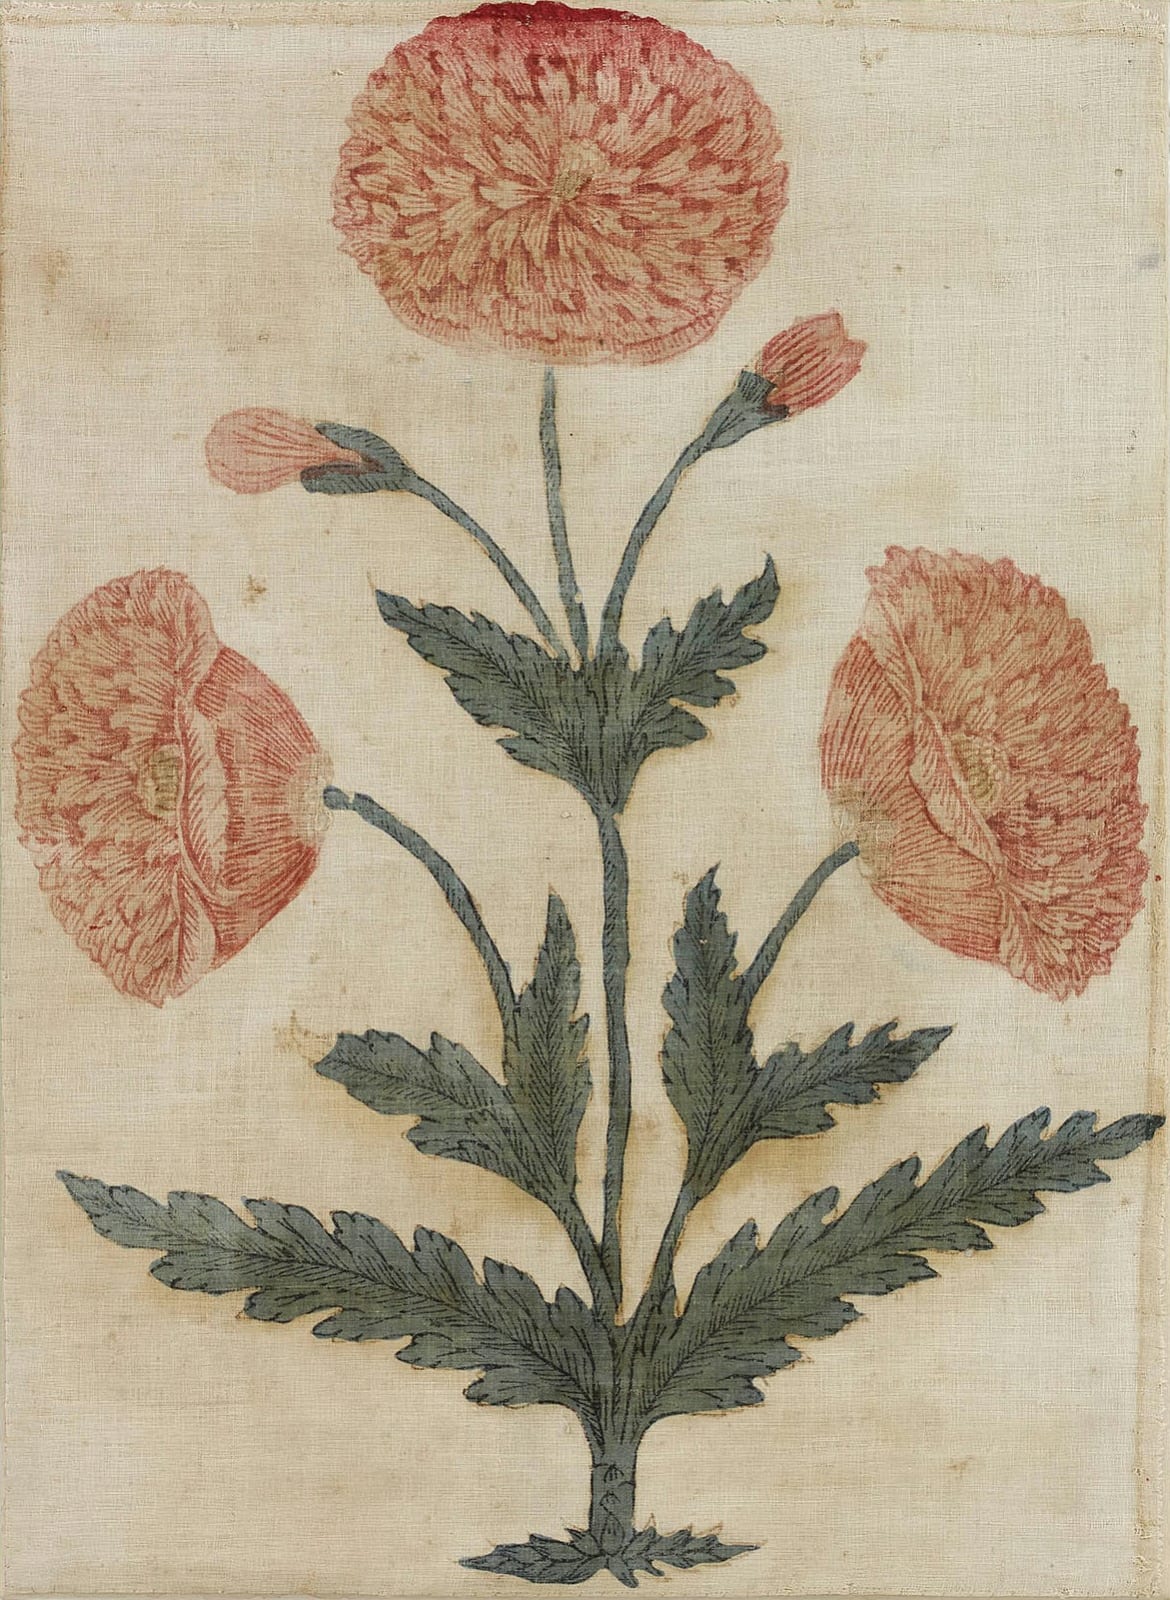 Mughal Poppy Plant, India, probably Burnhanpur, late 17th or early 18th century